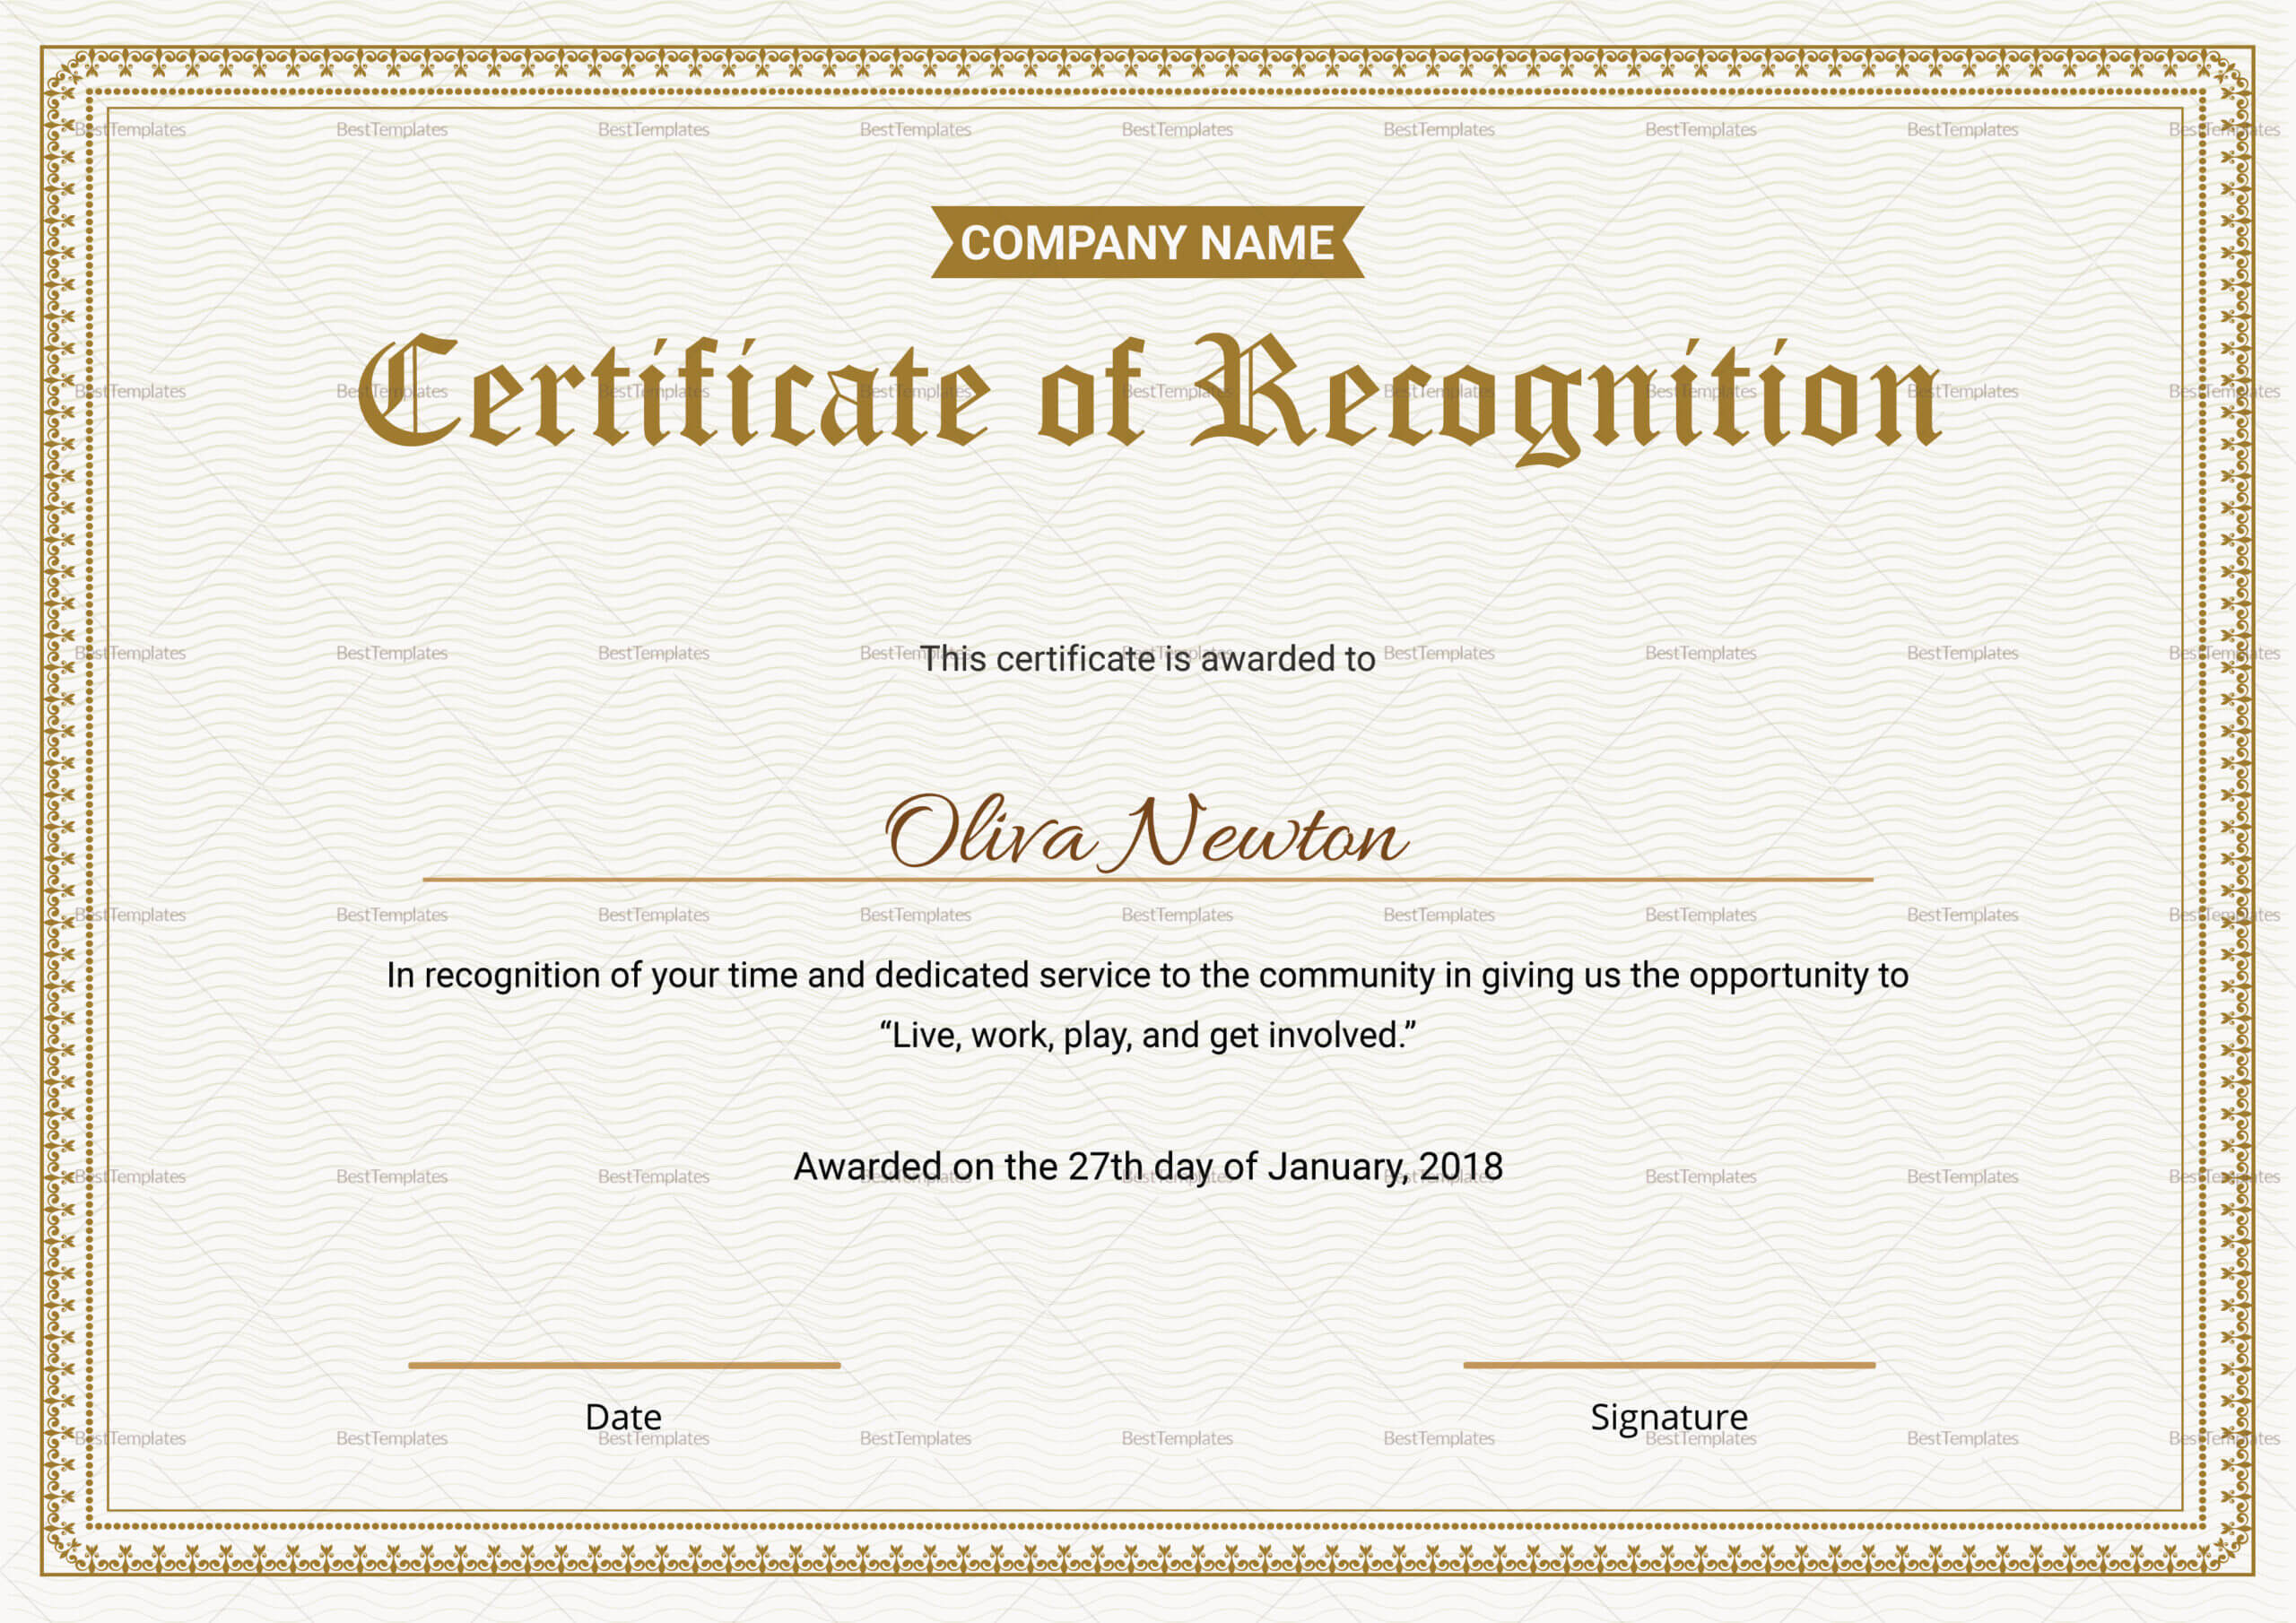 Employee Recognition Certificates Templates - Calep Throughout Best Employee Award Certificate Templates